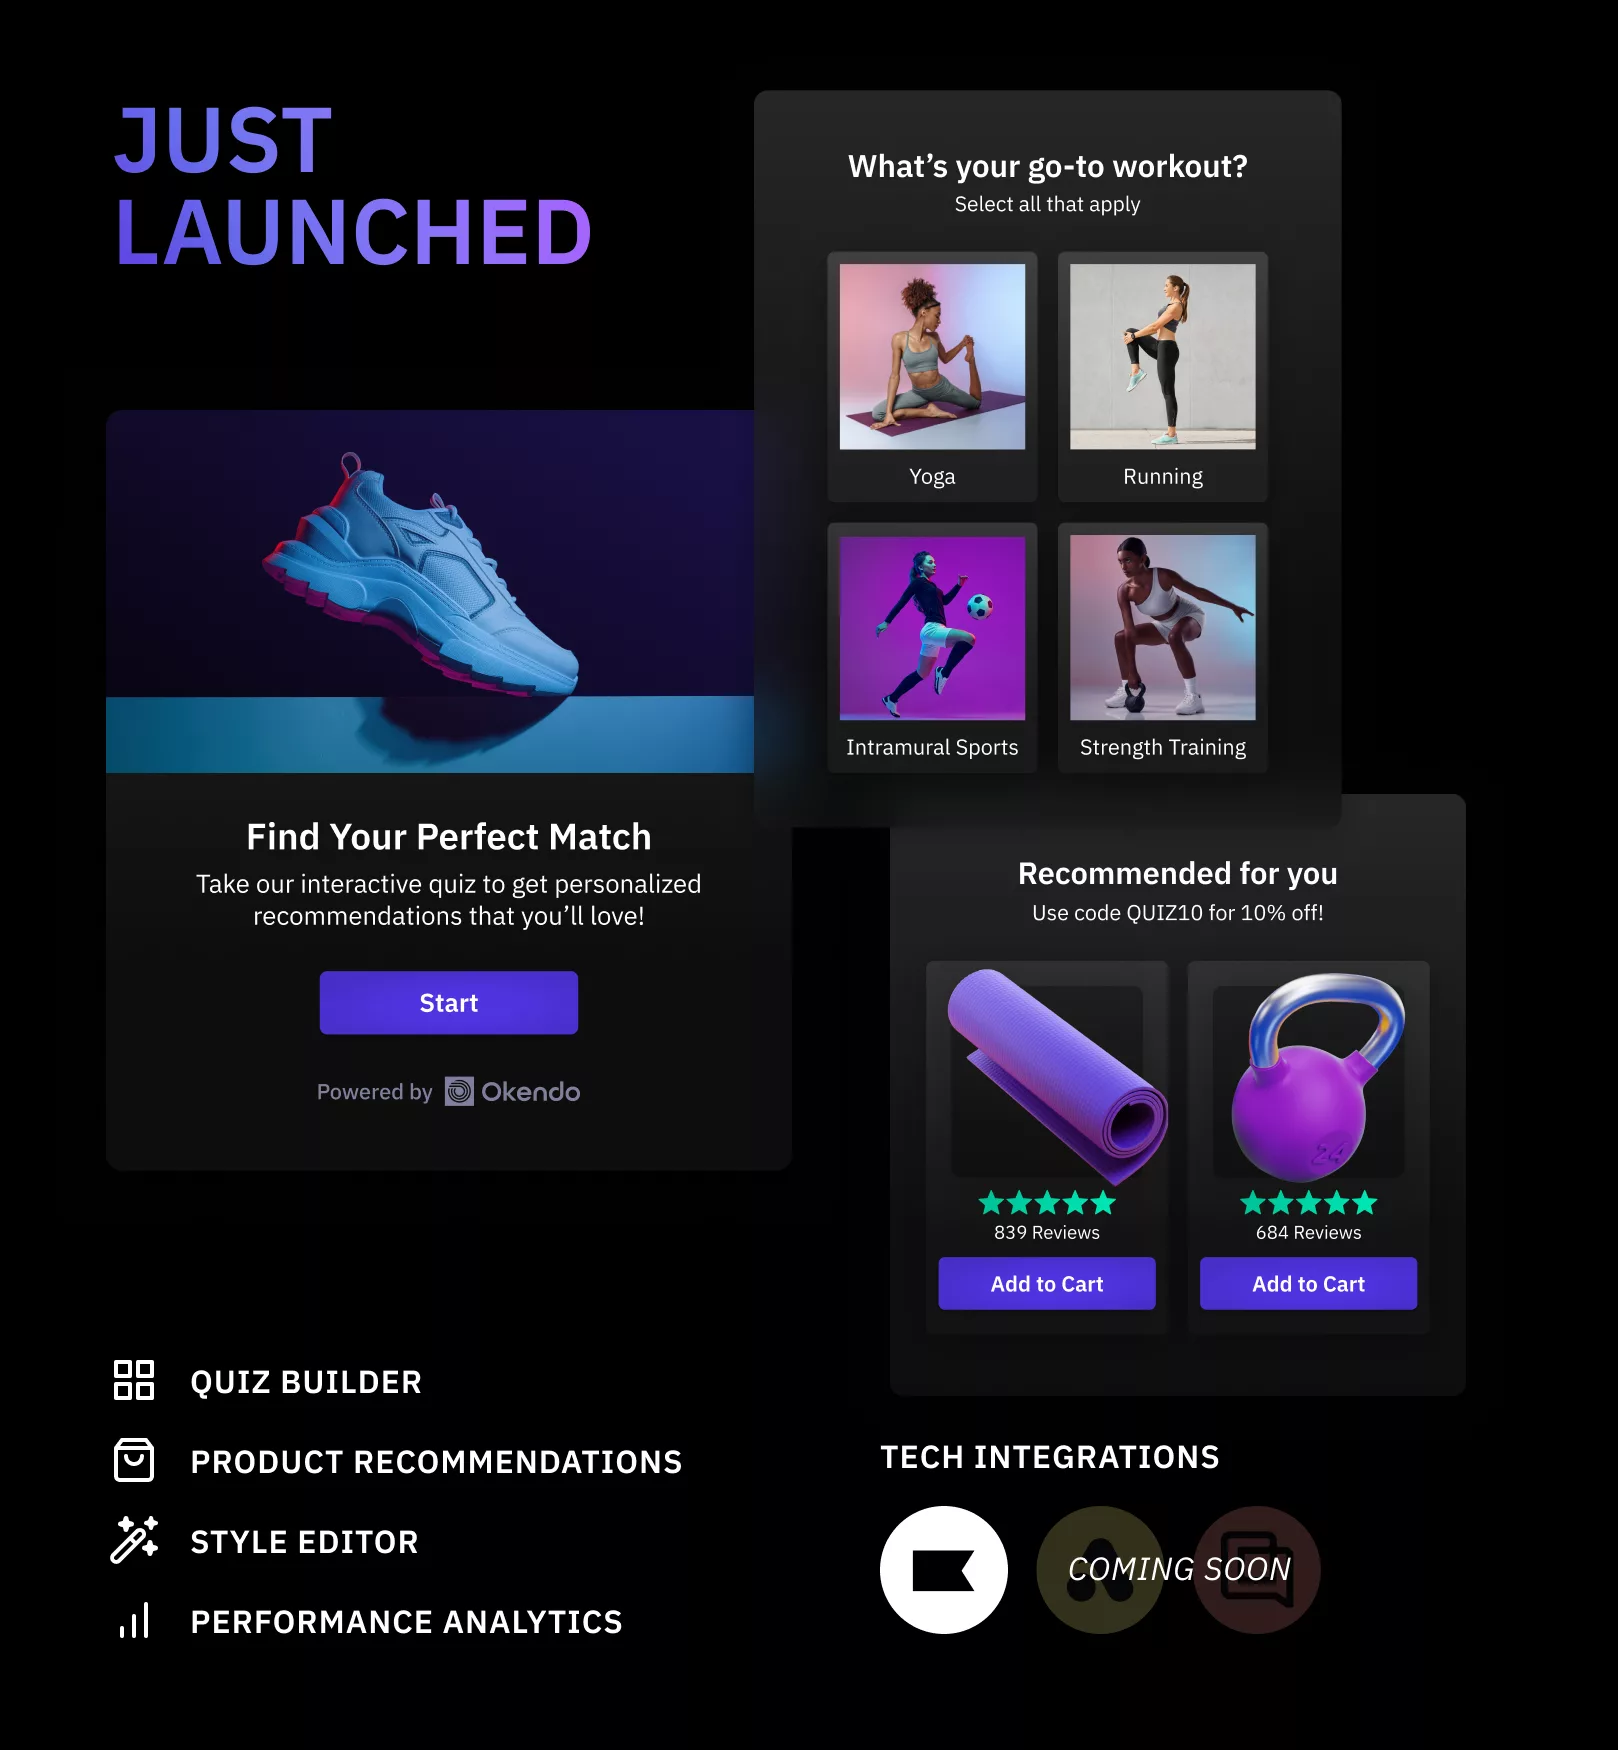 An ecommerce quiz showing the start of the quiz, a go-to workout question, and a personalized product recommendation